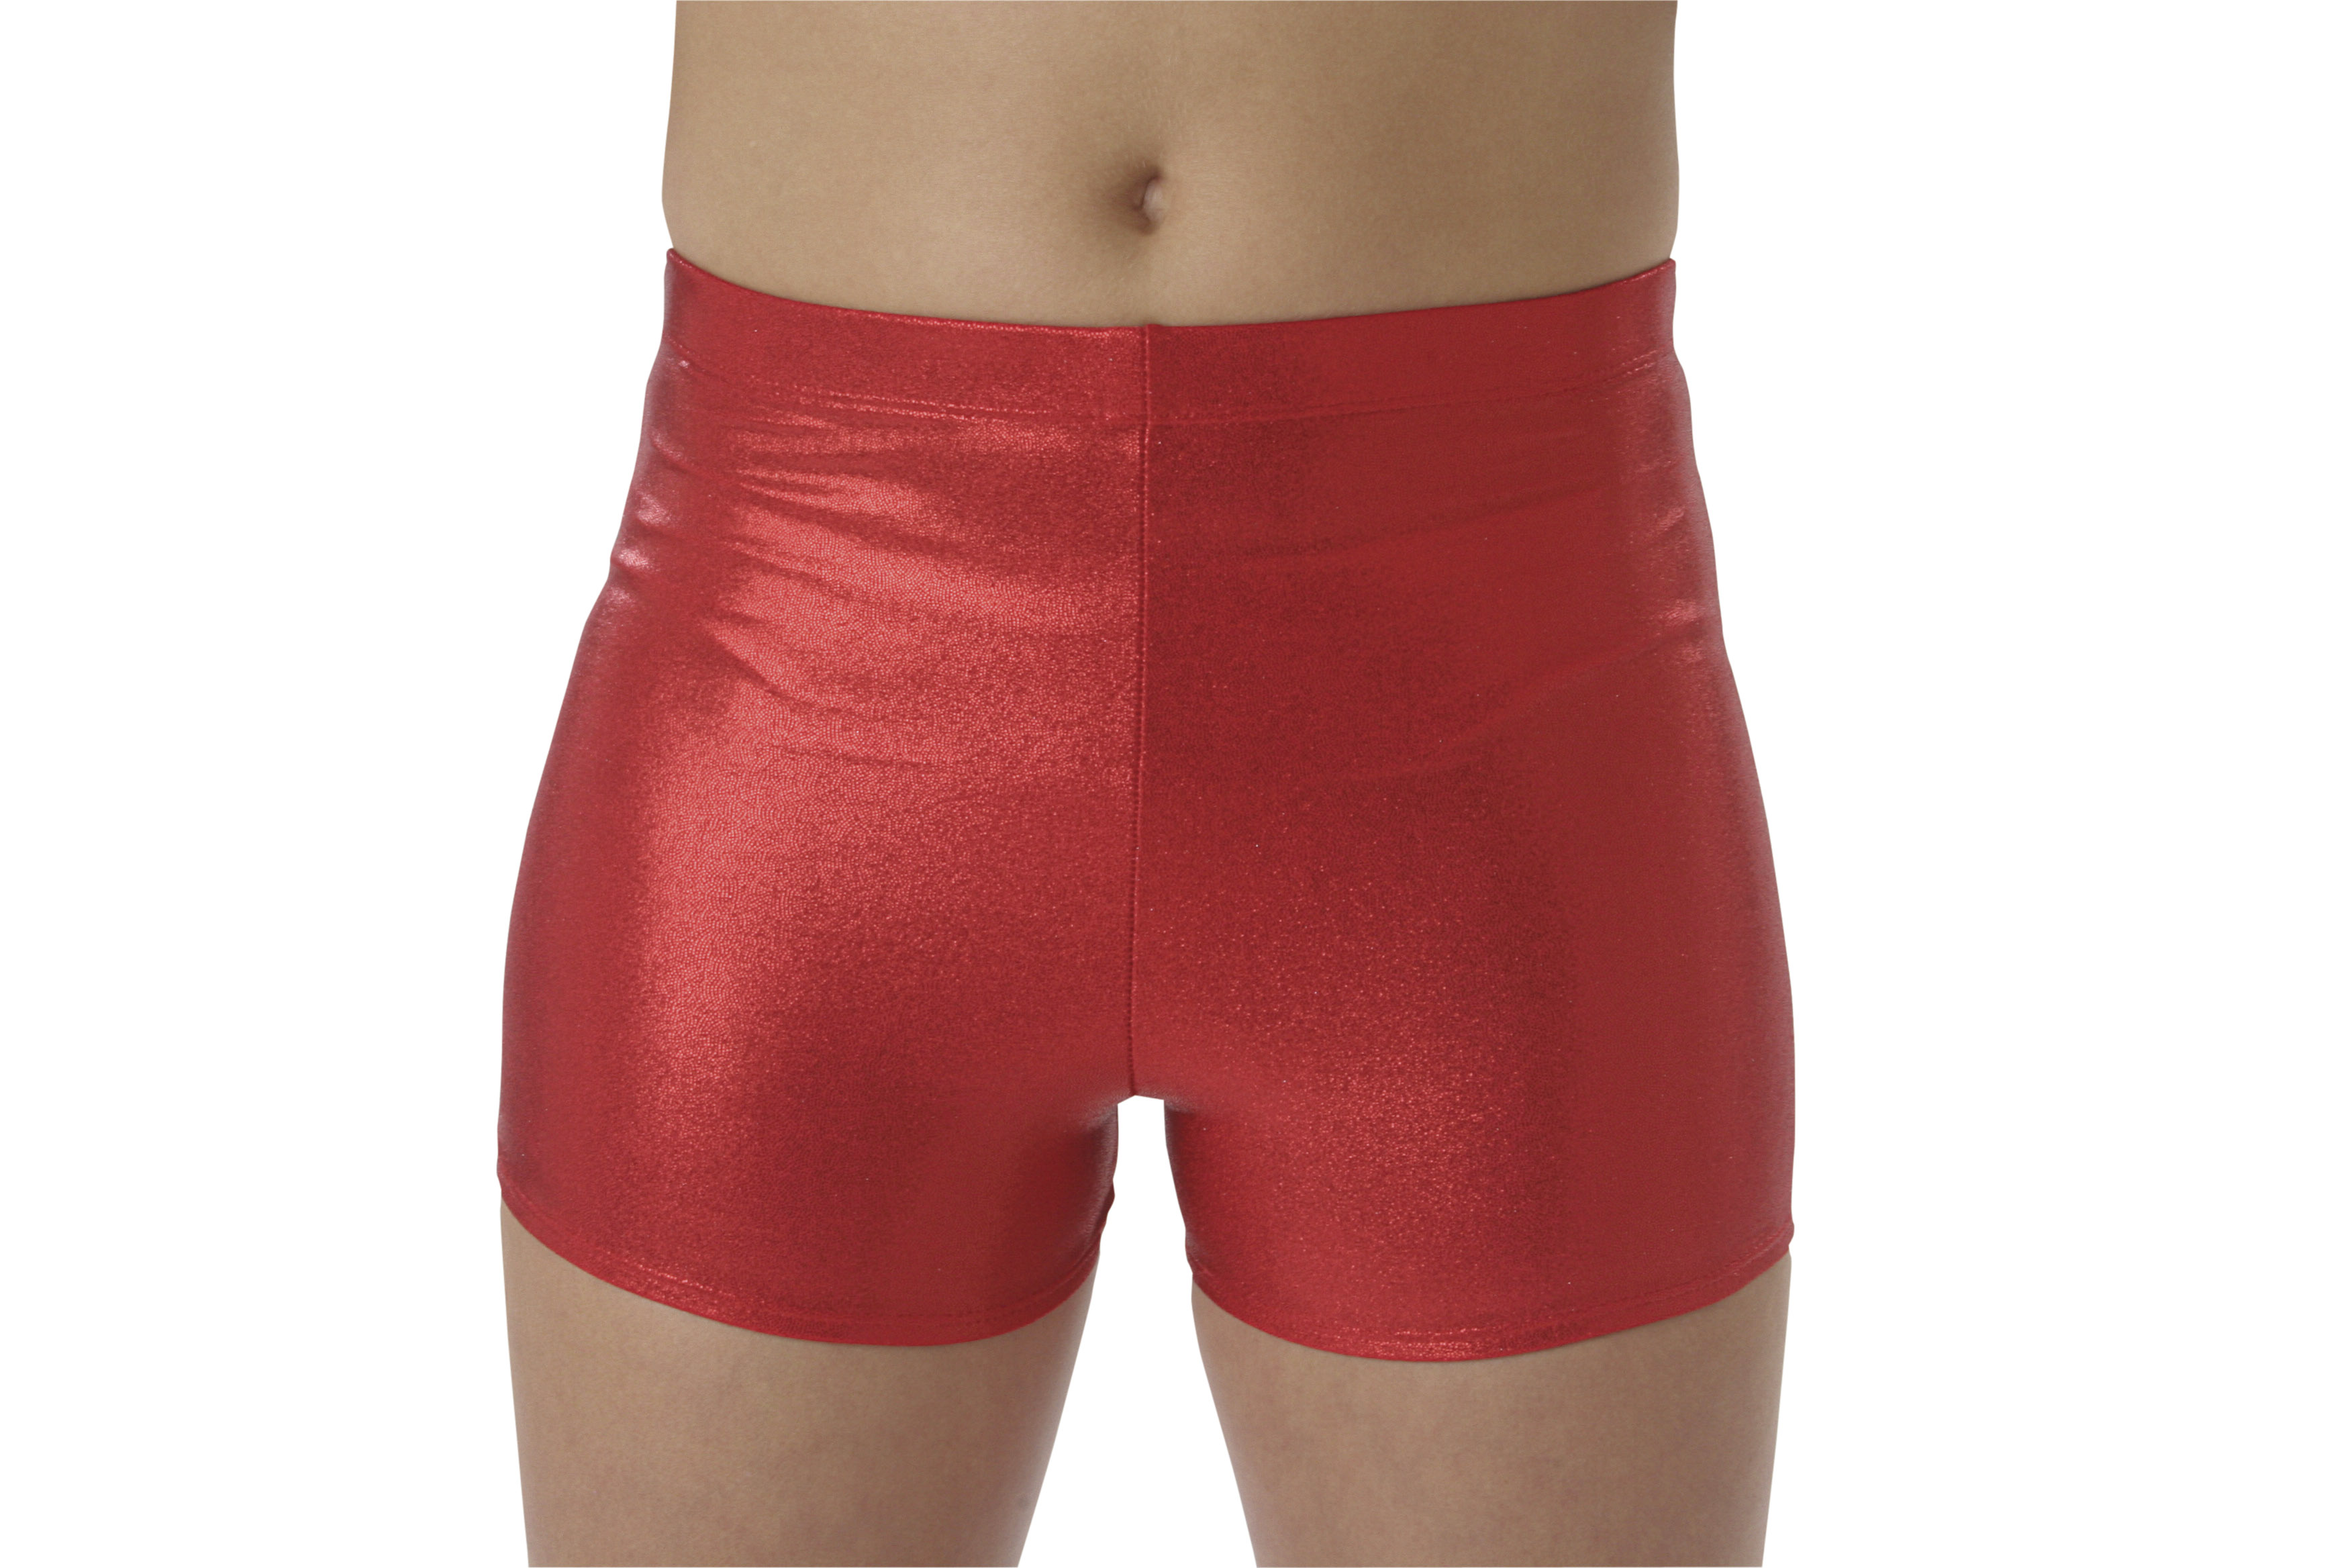 Pizzazz Cheer briefs variety of colors and sizes 